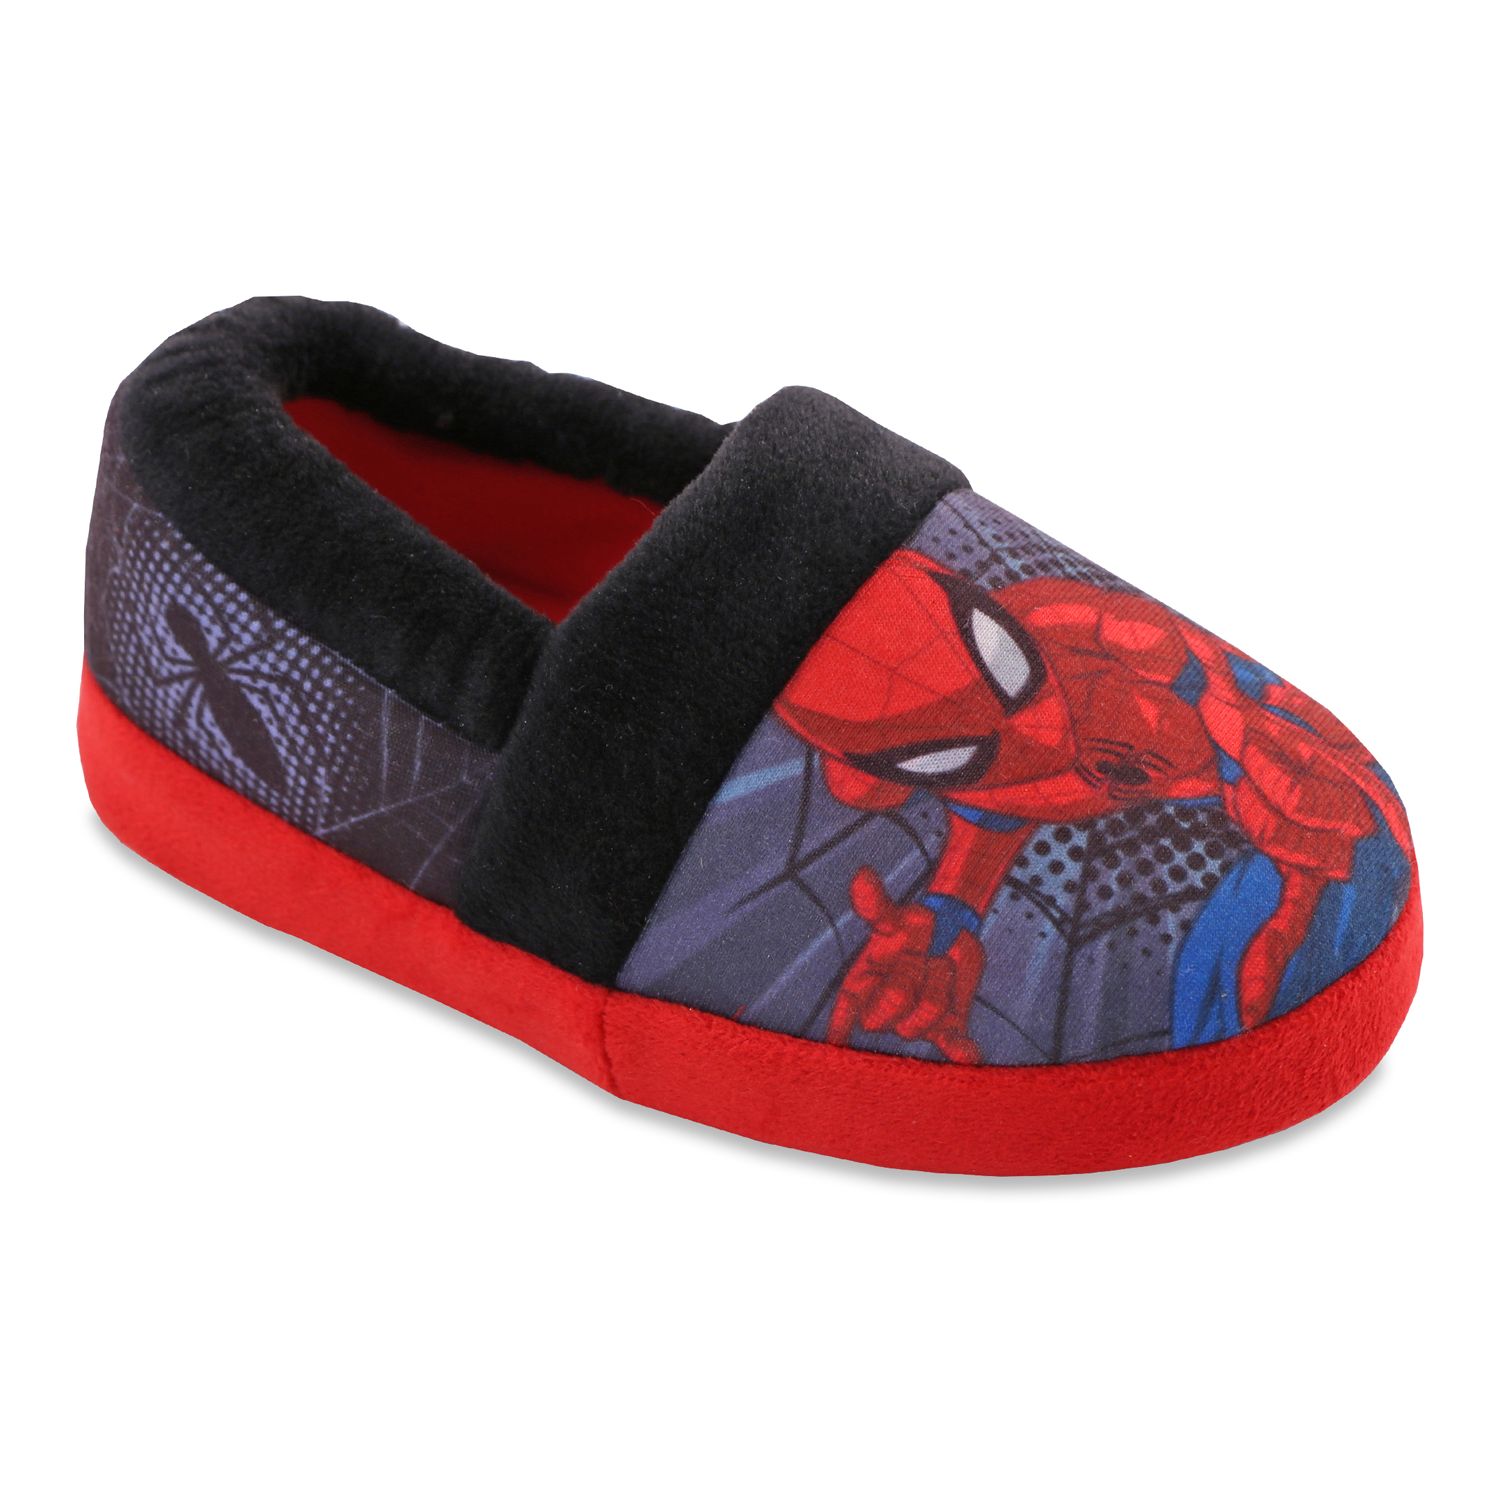 spiderman slippers size 1